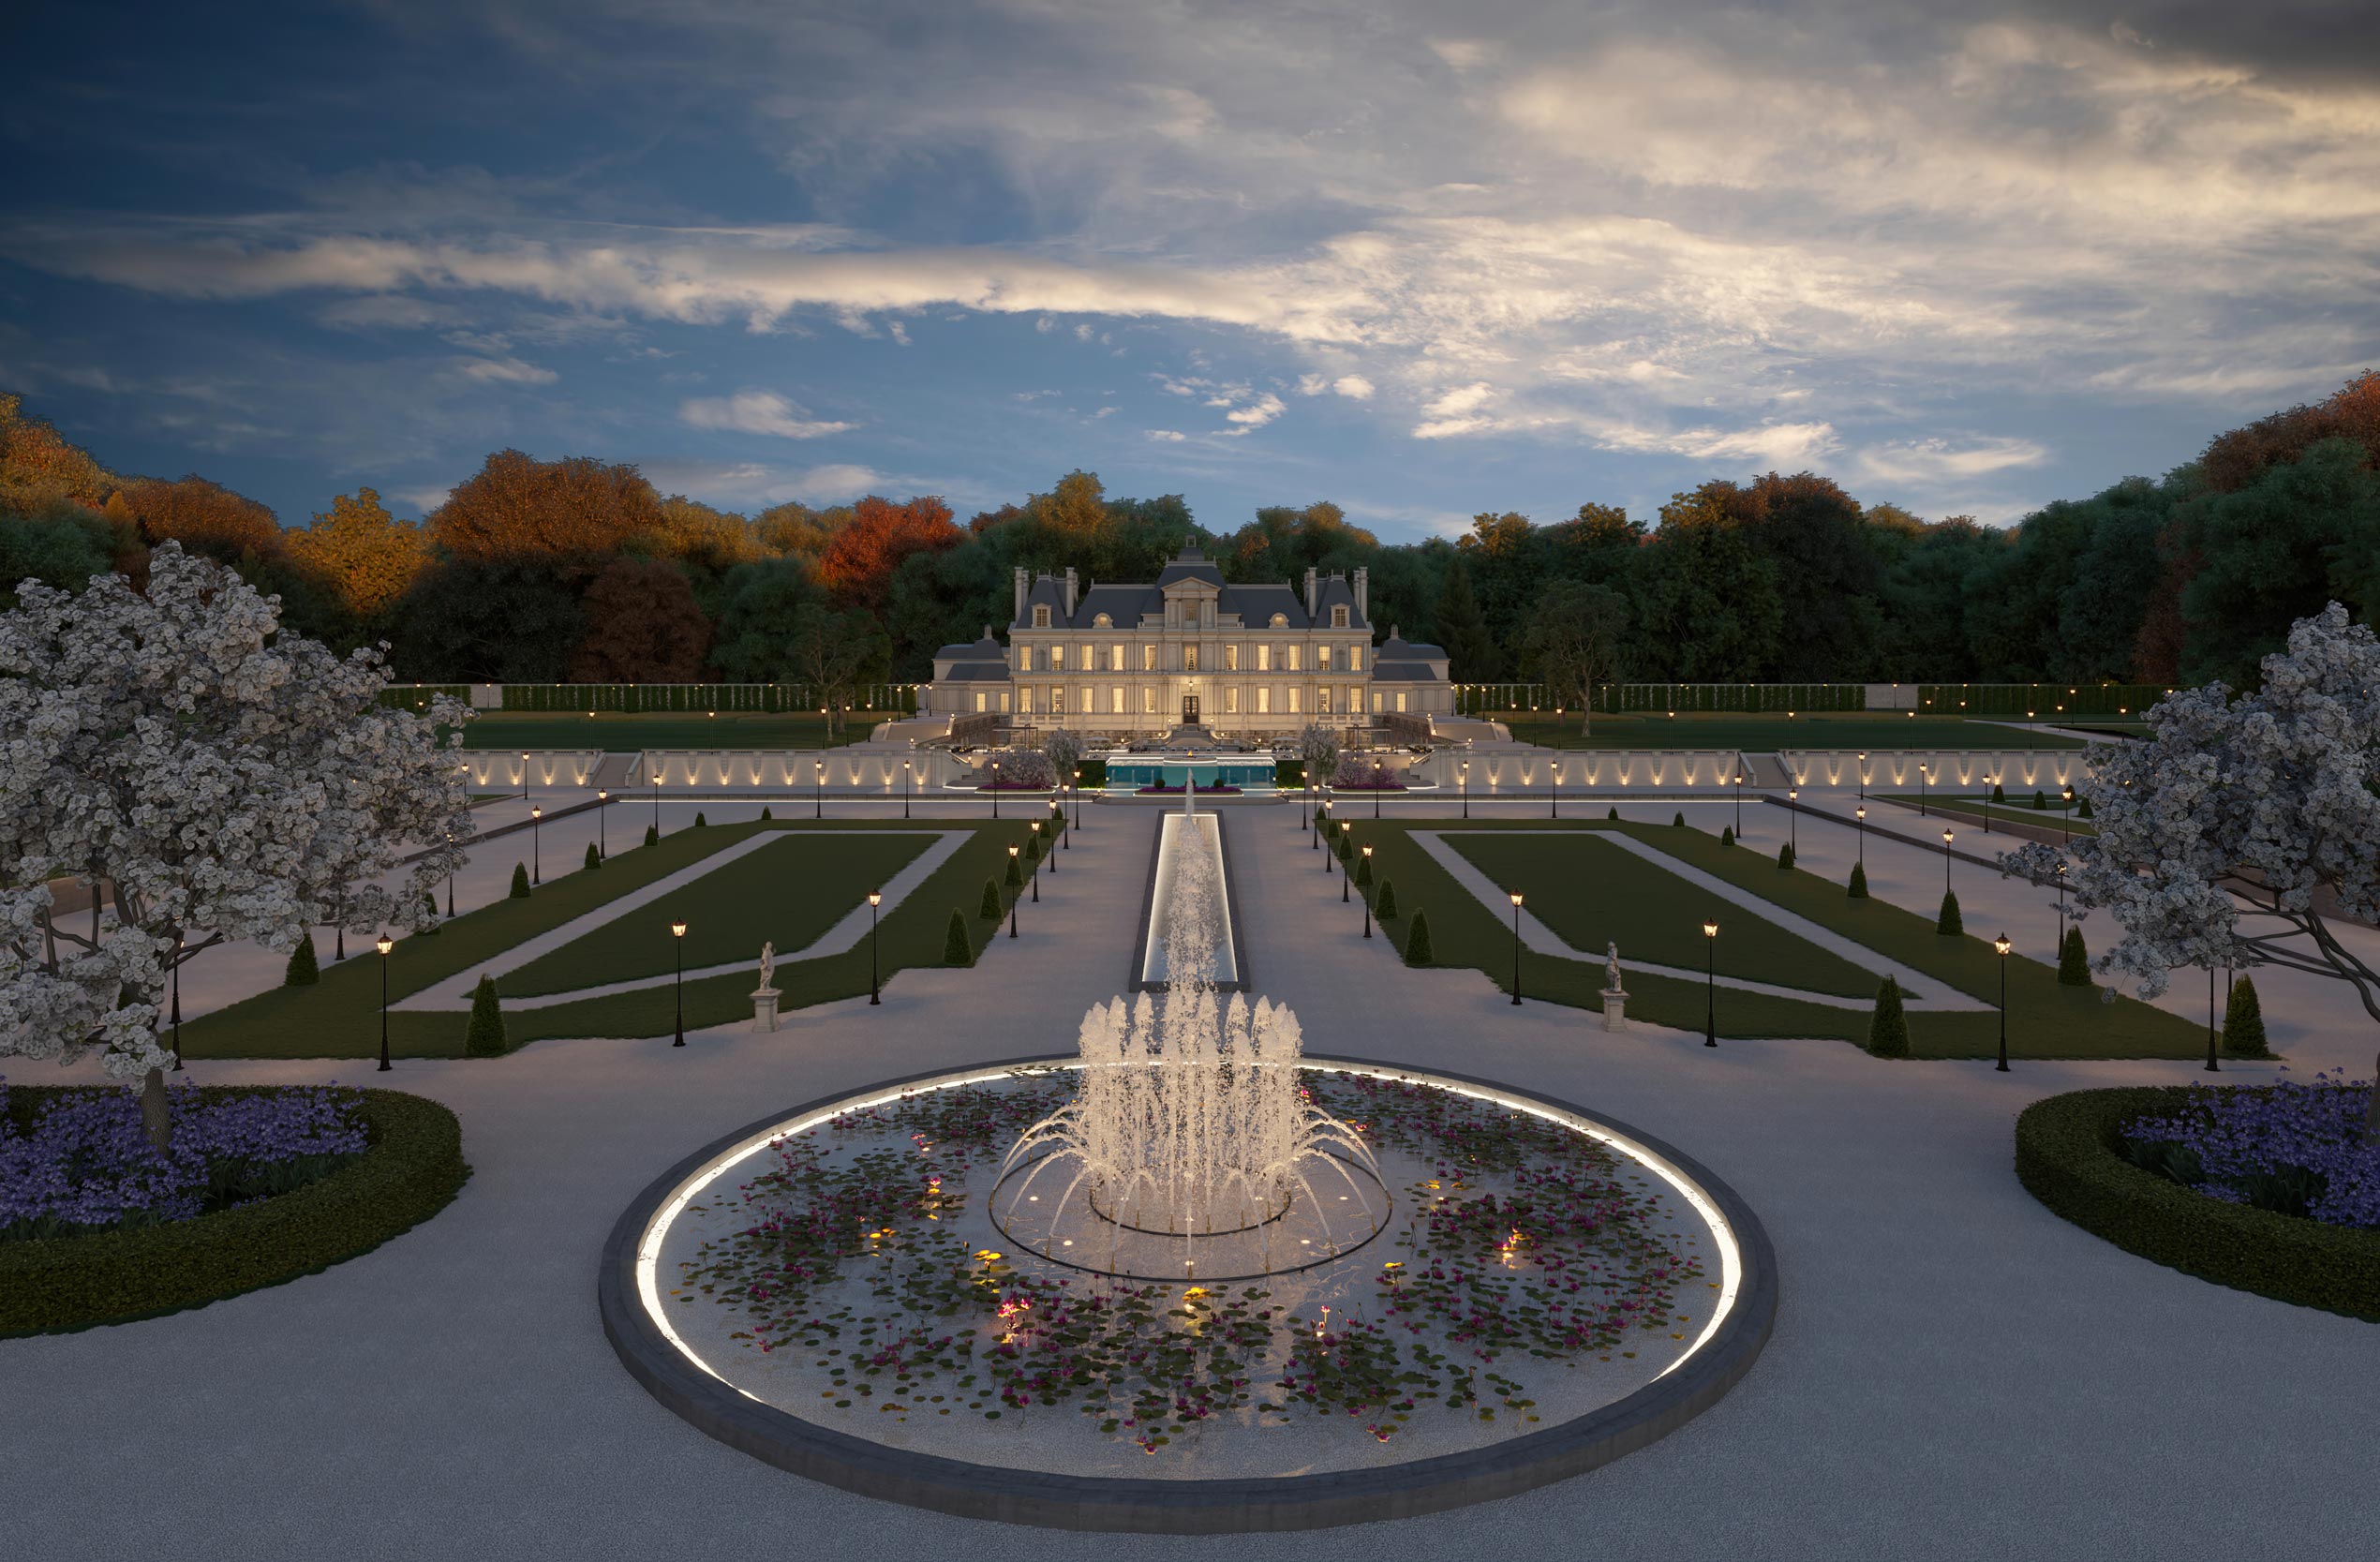 Luxury Residential Mansion Fountains & Driveway CGI Design Visual by Unit4 Studio London UK